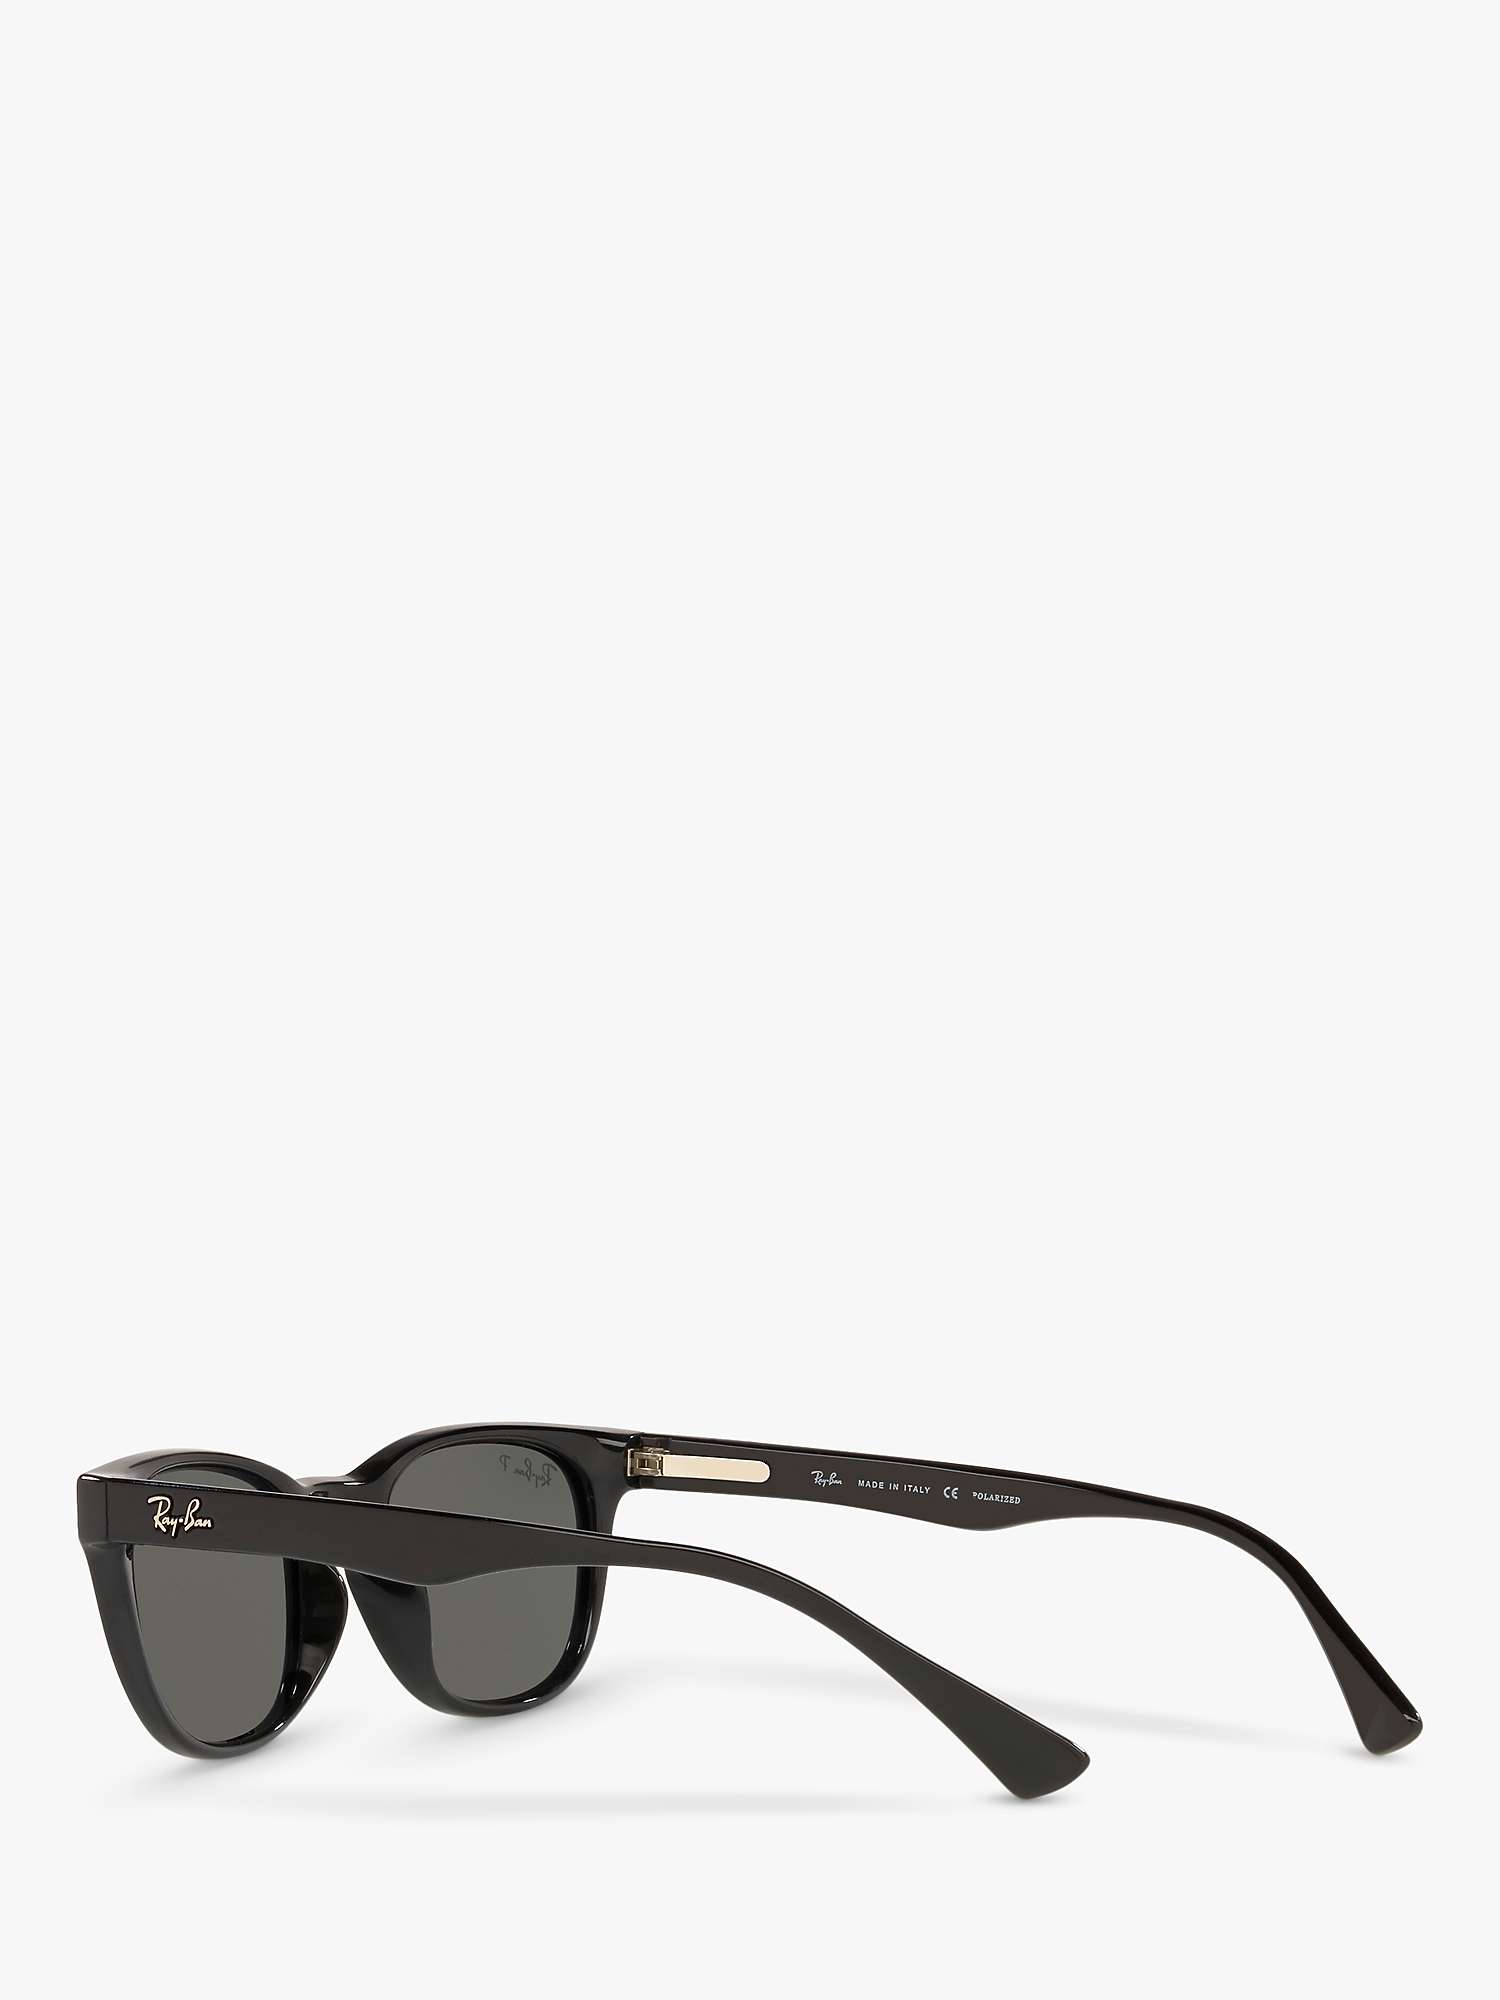 Buy Ray-Ban RB4140 Women's Polarised Square Sunglasses Online at johnlewis.com